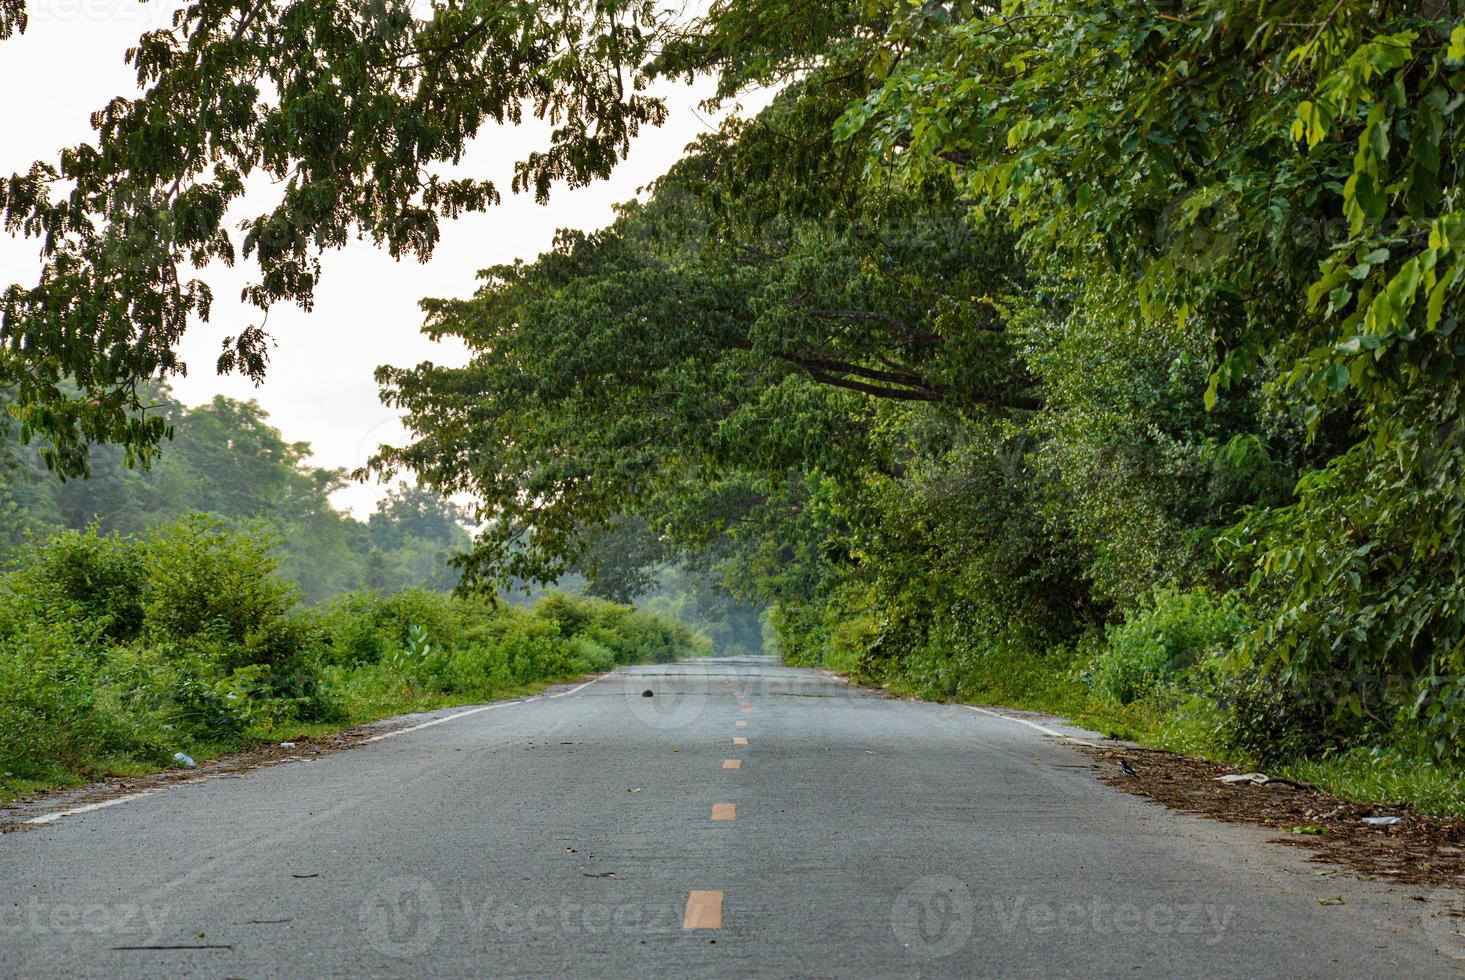 The paved road has a yellow guide line.  Surrounded by green trees. Evening time. Travel concept. Protect the environment. photo